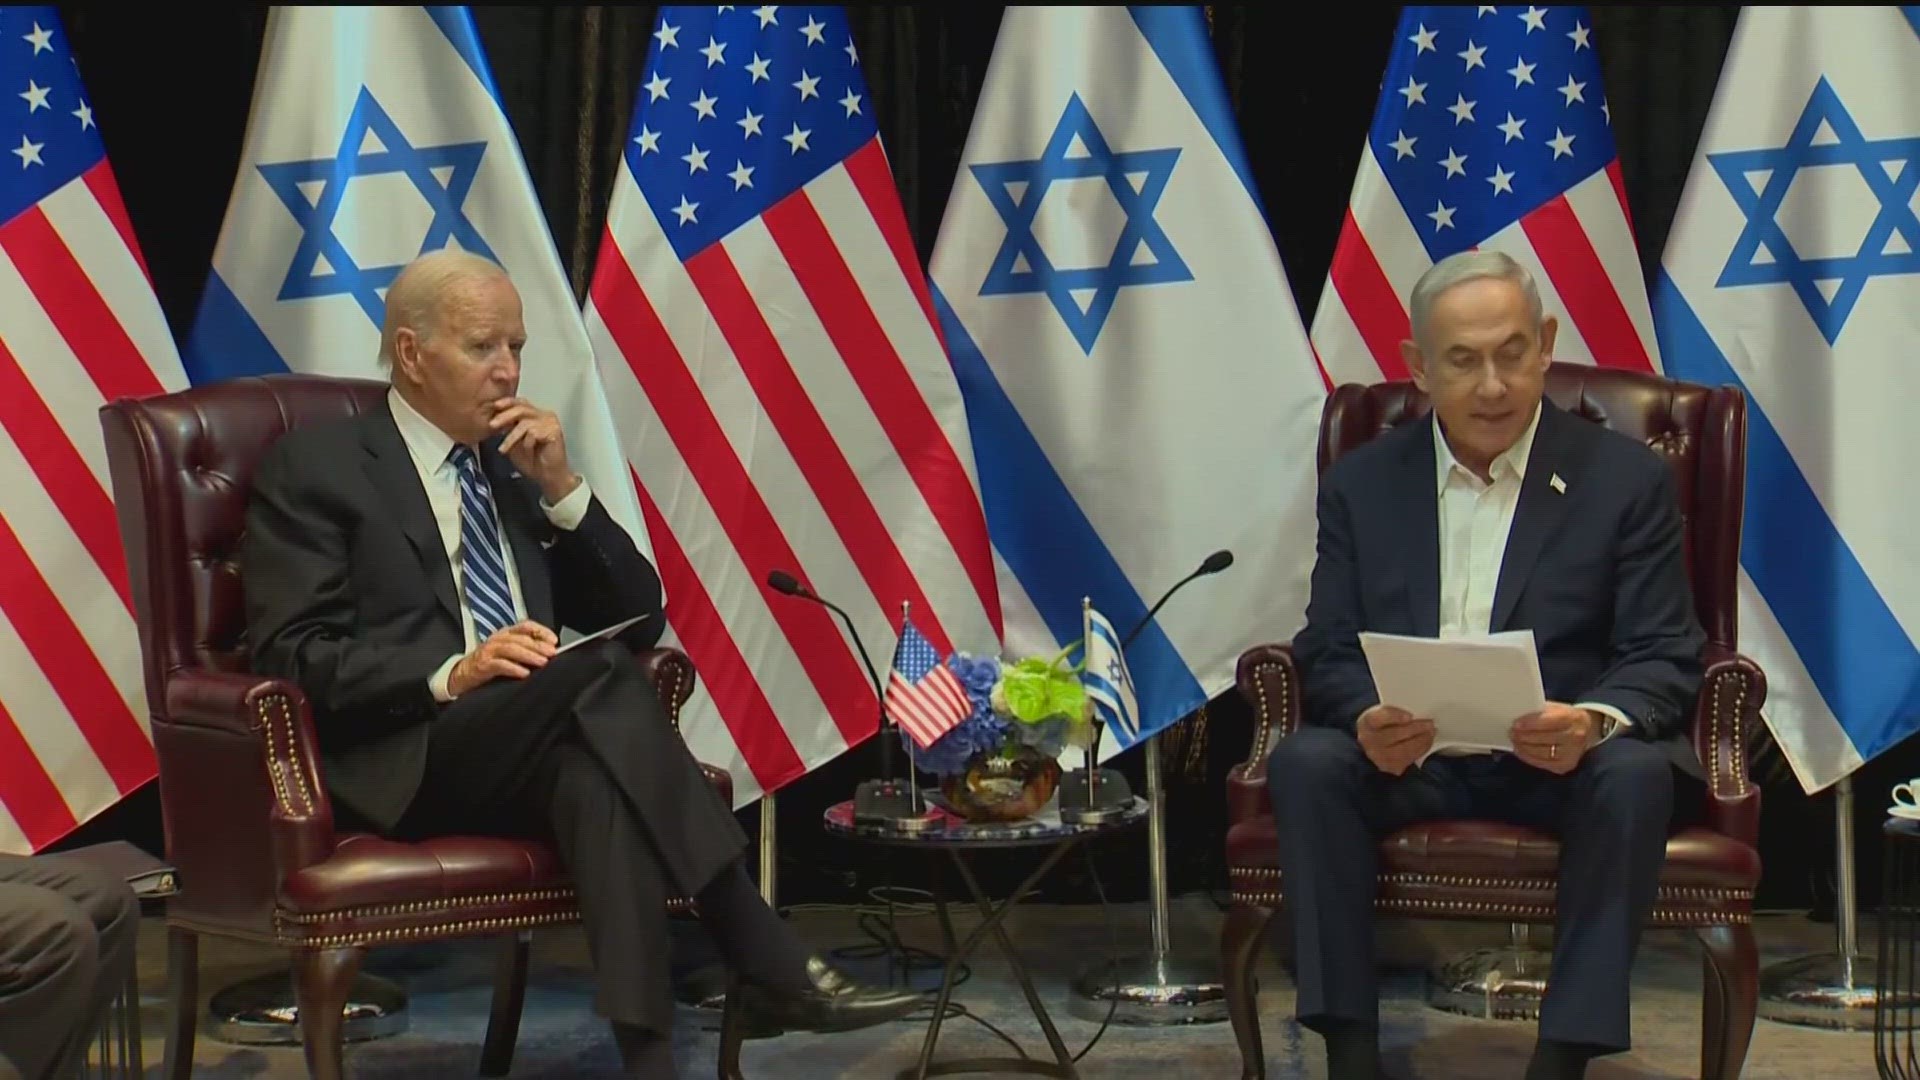 Biden and Netanyahu spoke Thursday by phone days after Israeli airstrikes killed seven World Central Kitchen workers in Gaza.